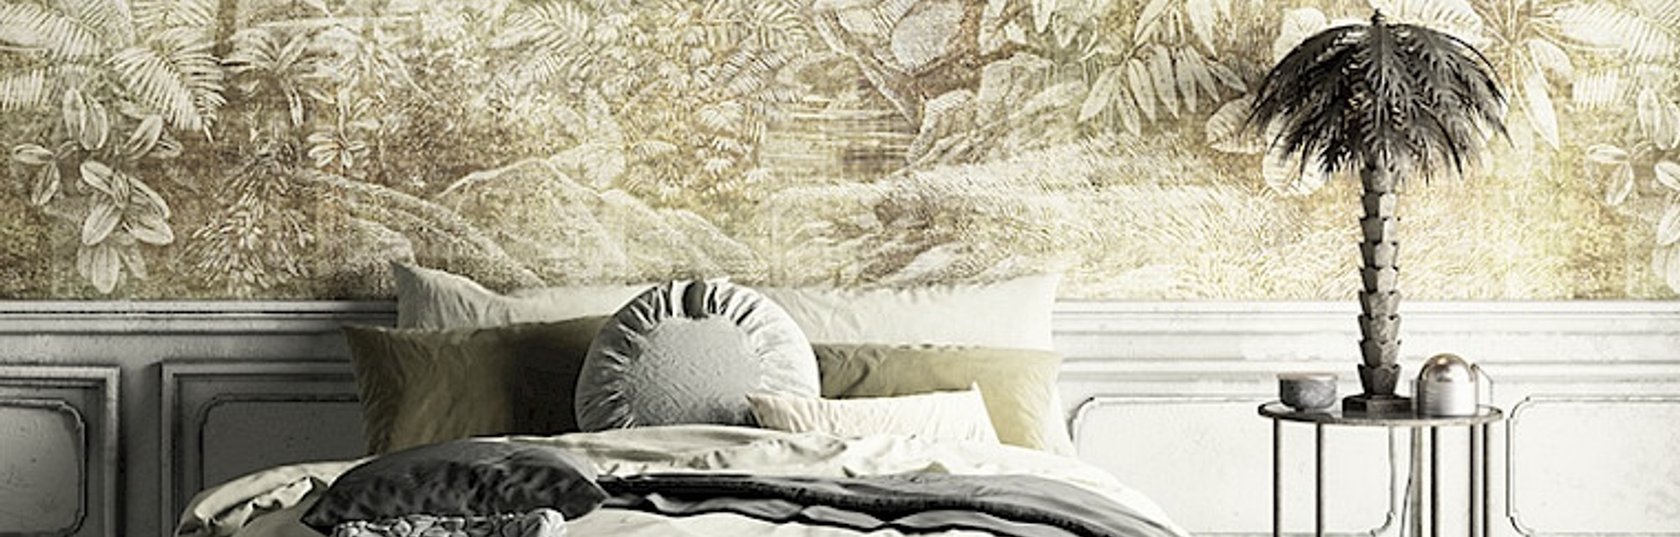 How a company started as a hobby became a mainstay in the fabrics and wallpaper industry